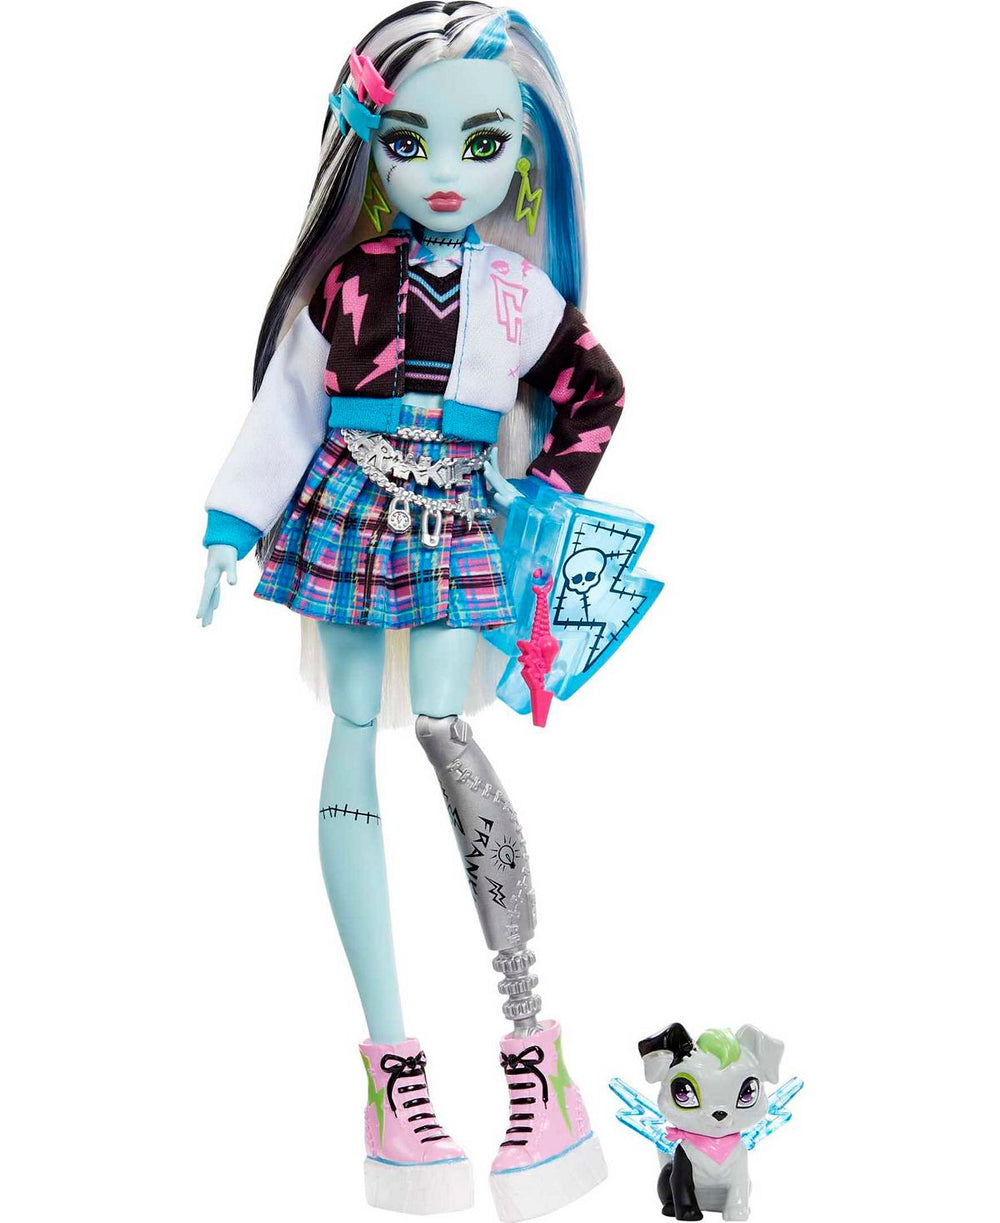 Monster High 11 inch Fashion Doll - Frankie Stein with Prosthetic Leg